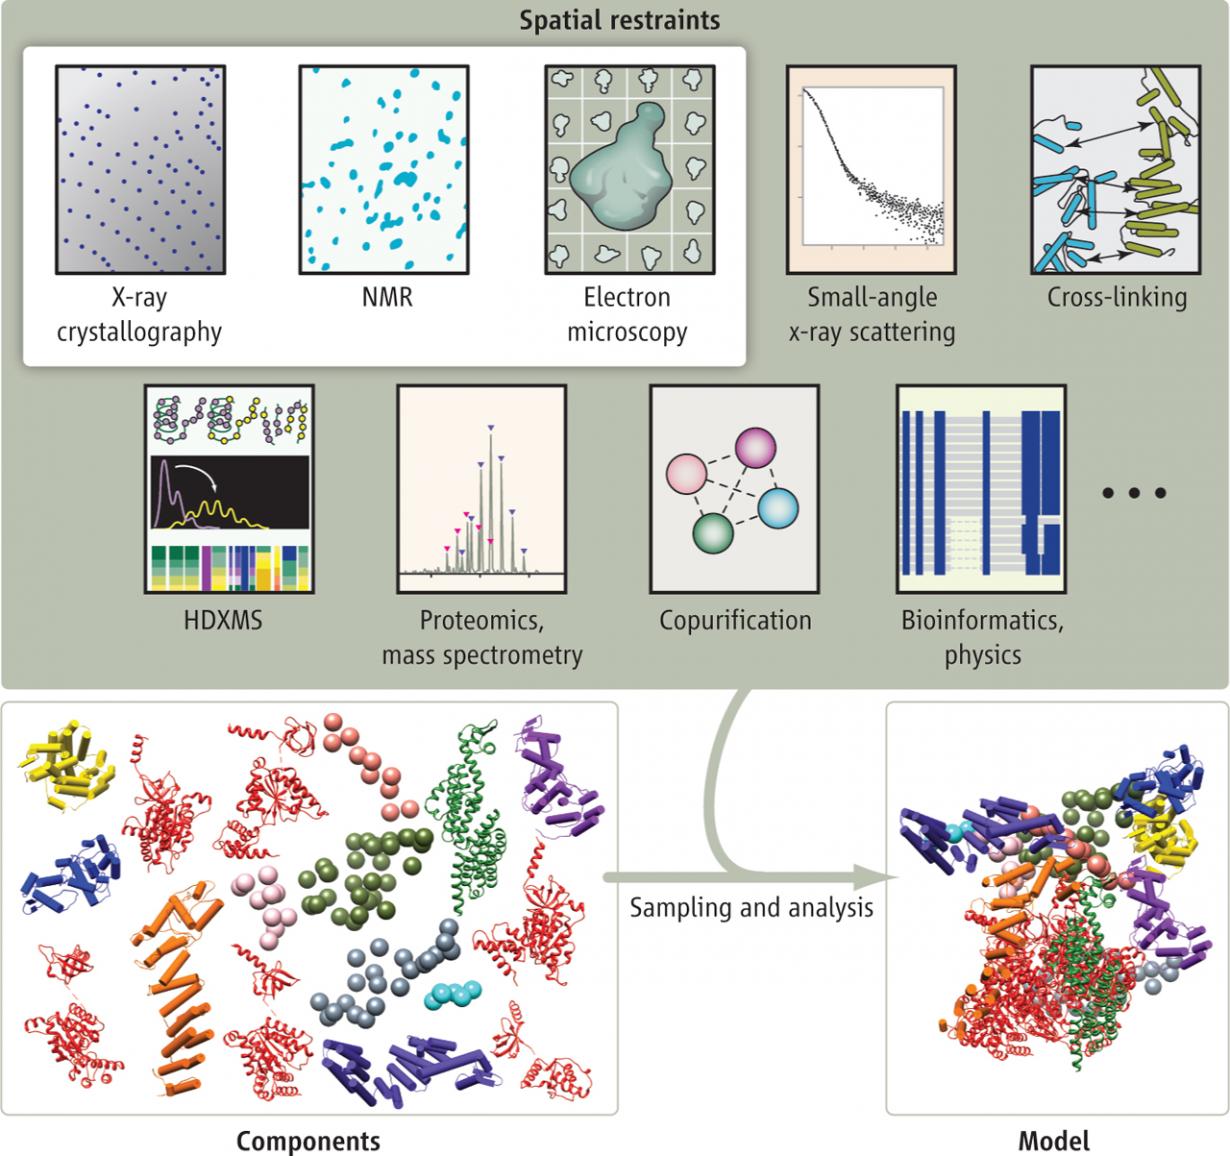 Assembly of protein complexes from varied information